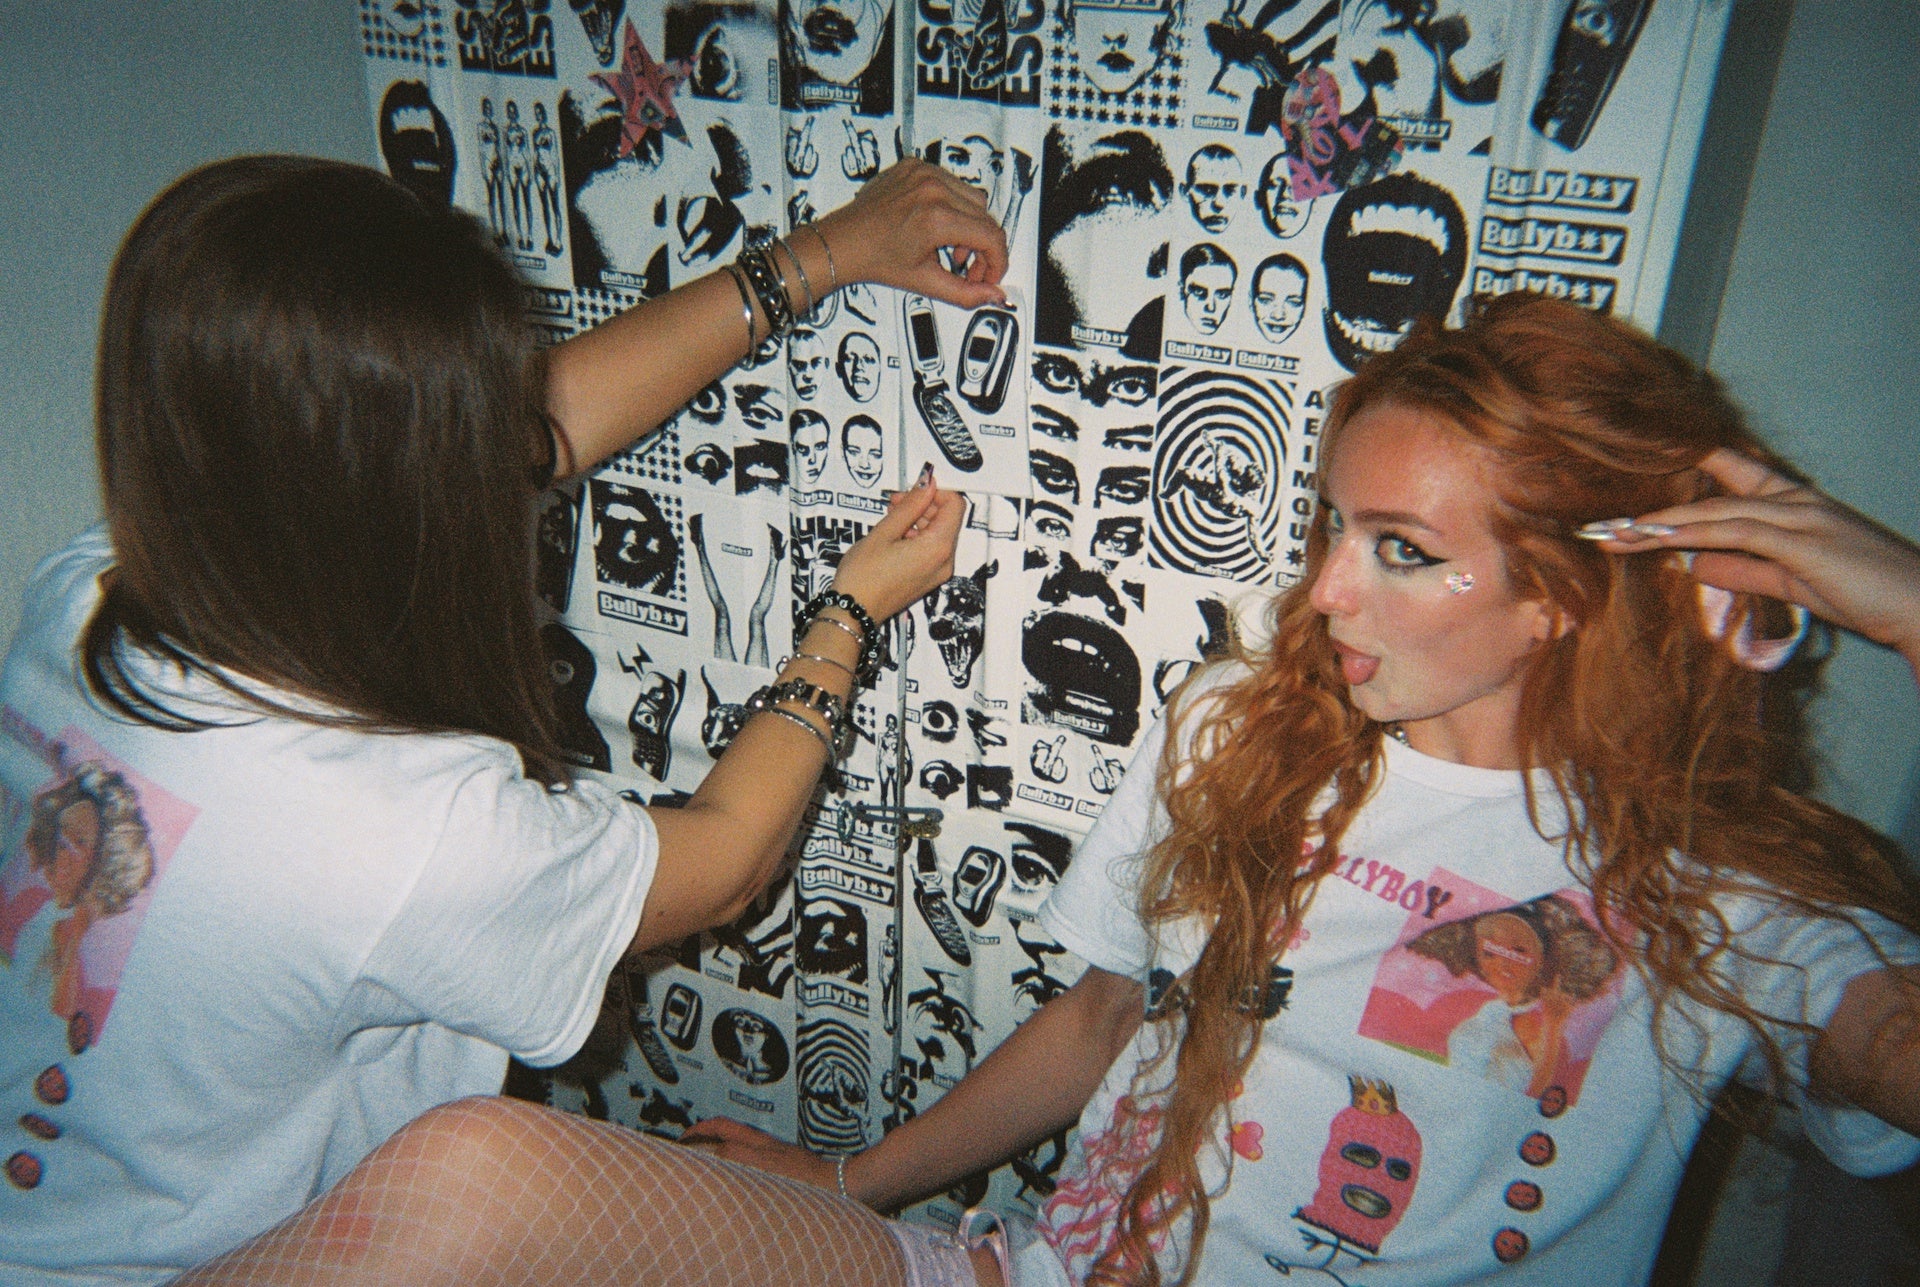 Two Bullyboy models wearing Bullyboy t-shirts while applying stickers to the wall behind them